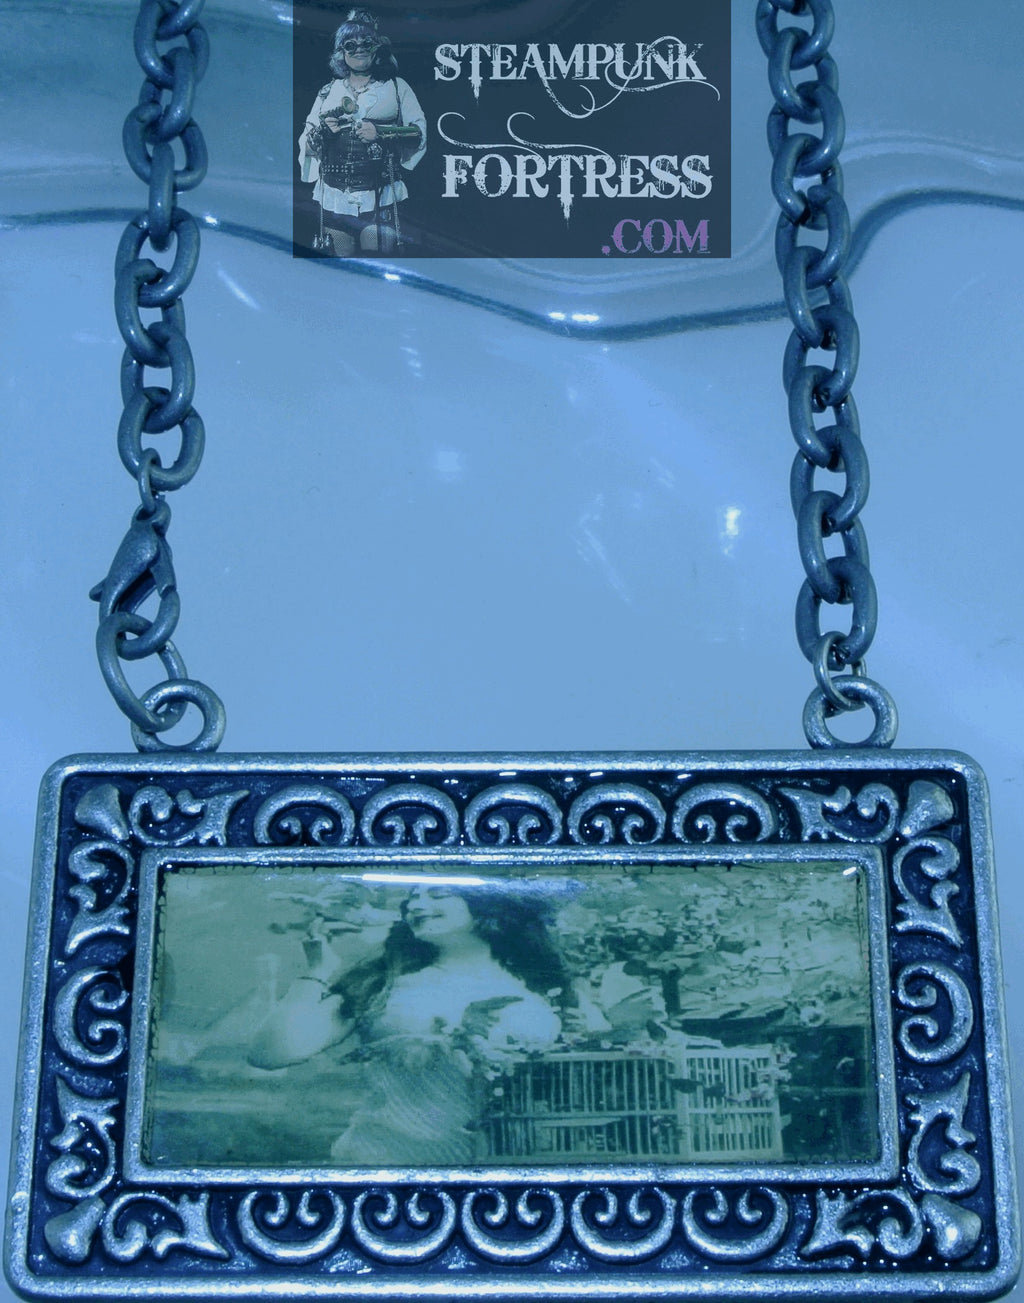 SILVER VINTAGE LADIES BIRDCAGE LADY BIRDS RECTANGLE NECKLACE SET AVAILABLE STARR WILDE STEAMPUNK FORTRESS